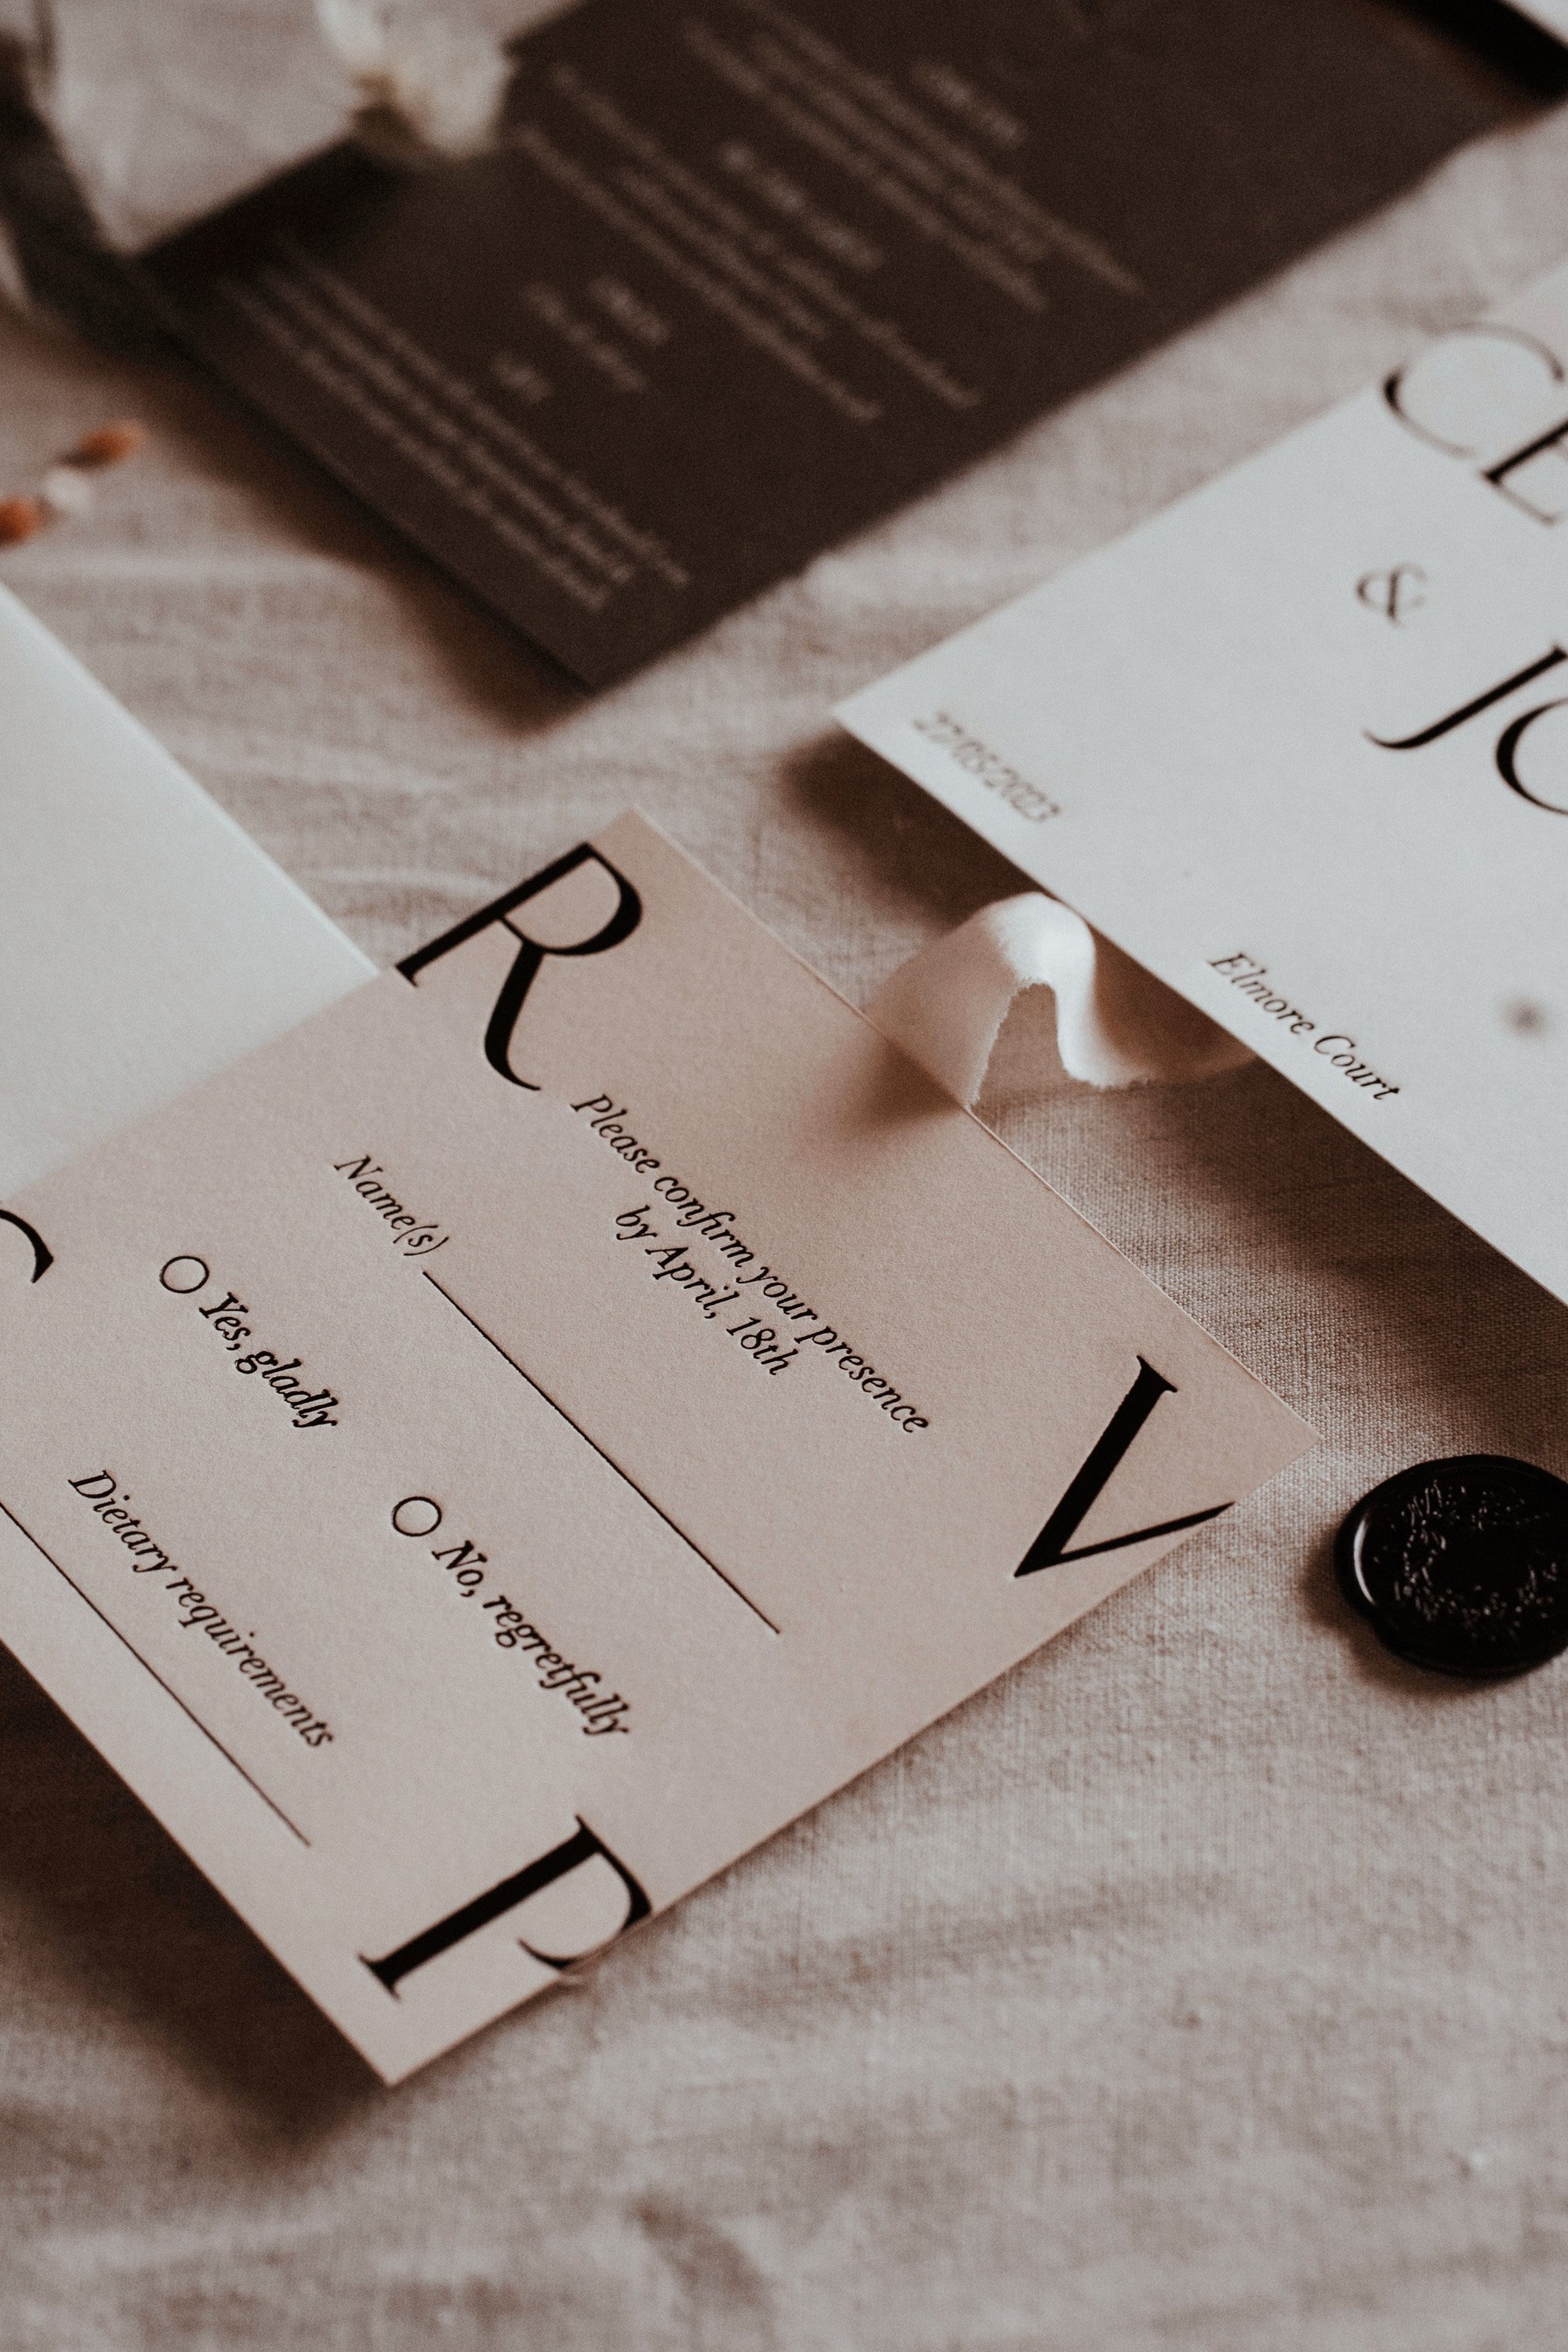 Fine art wedding stationery using recycled materials and sustainable printing for eco inspiration